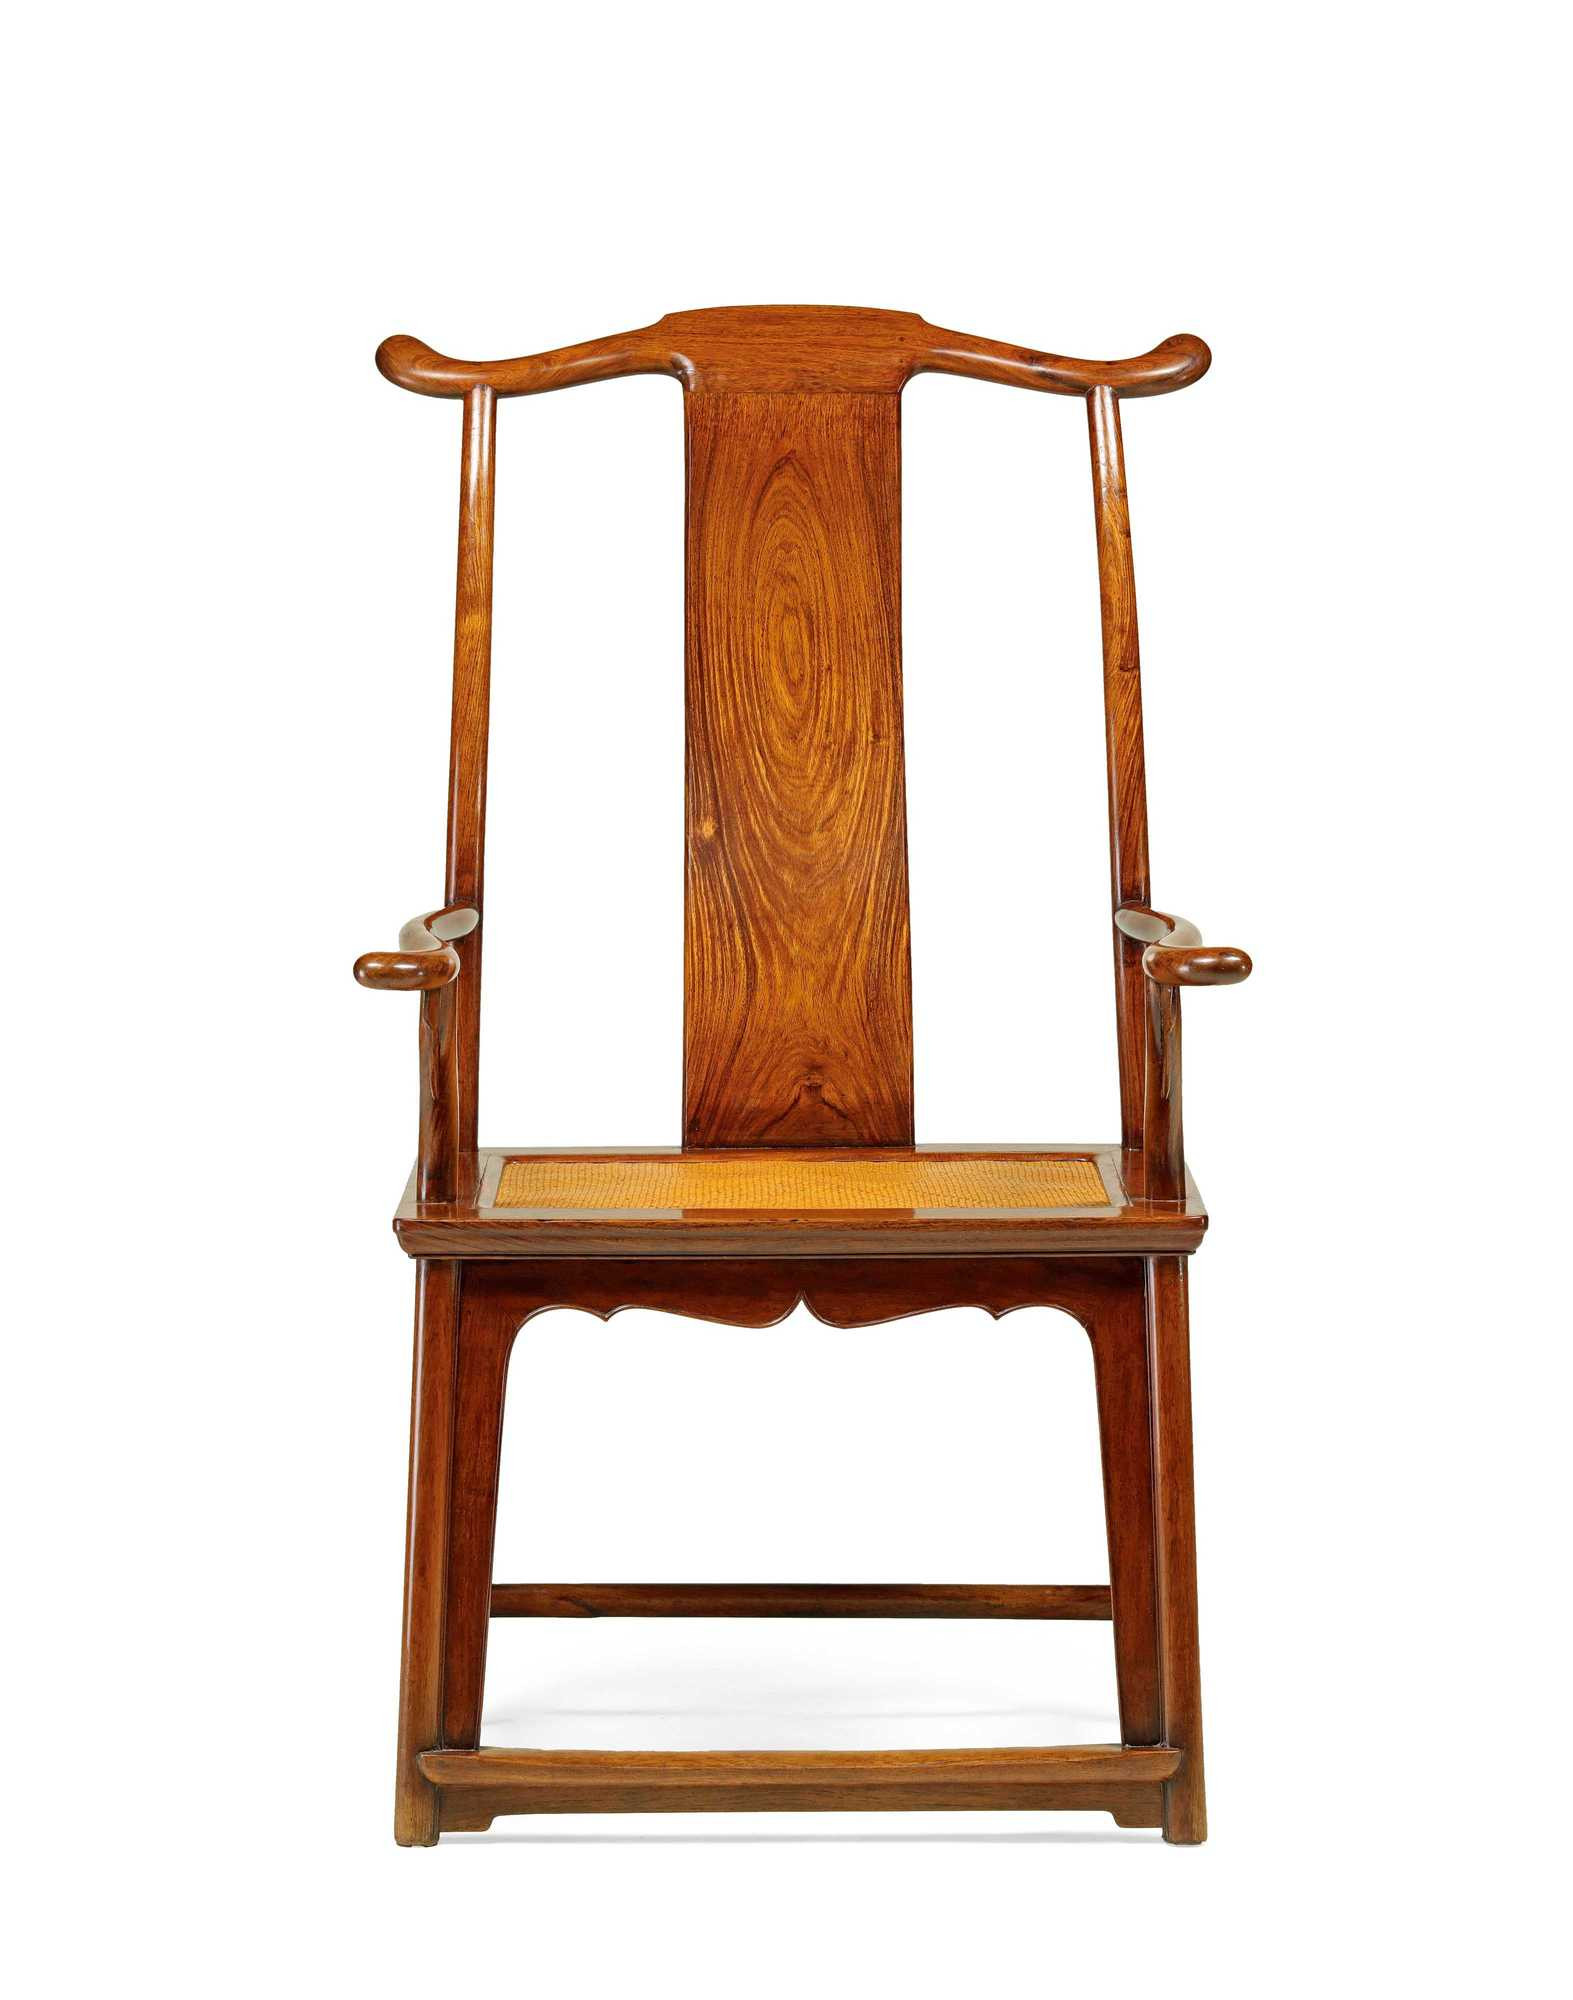 HUANGHUALI YOKE-BACKED “OFFICIAL’S HAT” ARMCHAIR WITH FOUR PROTRUDING ENDS